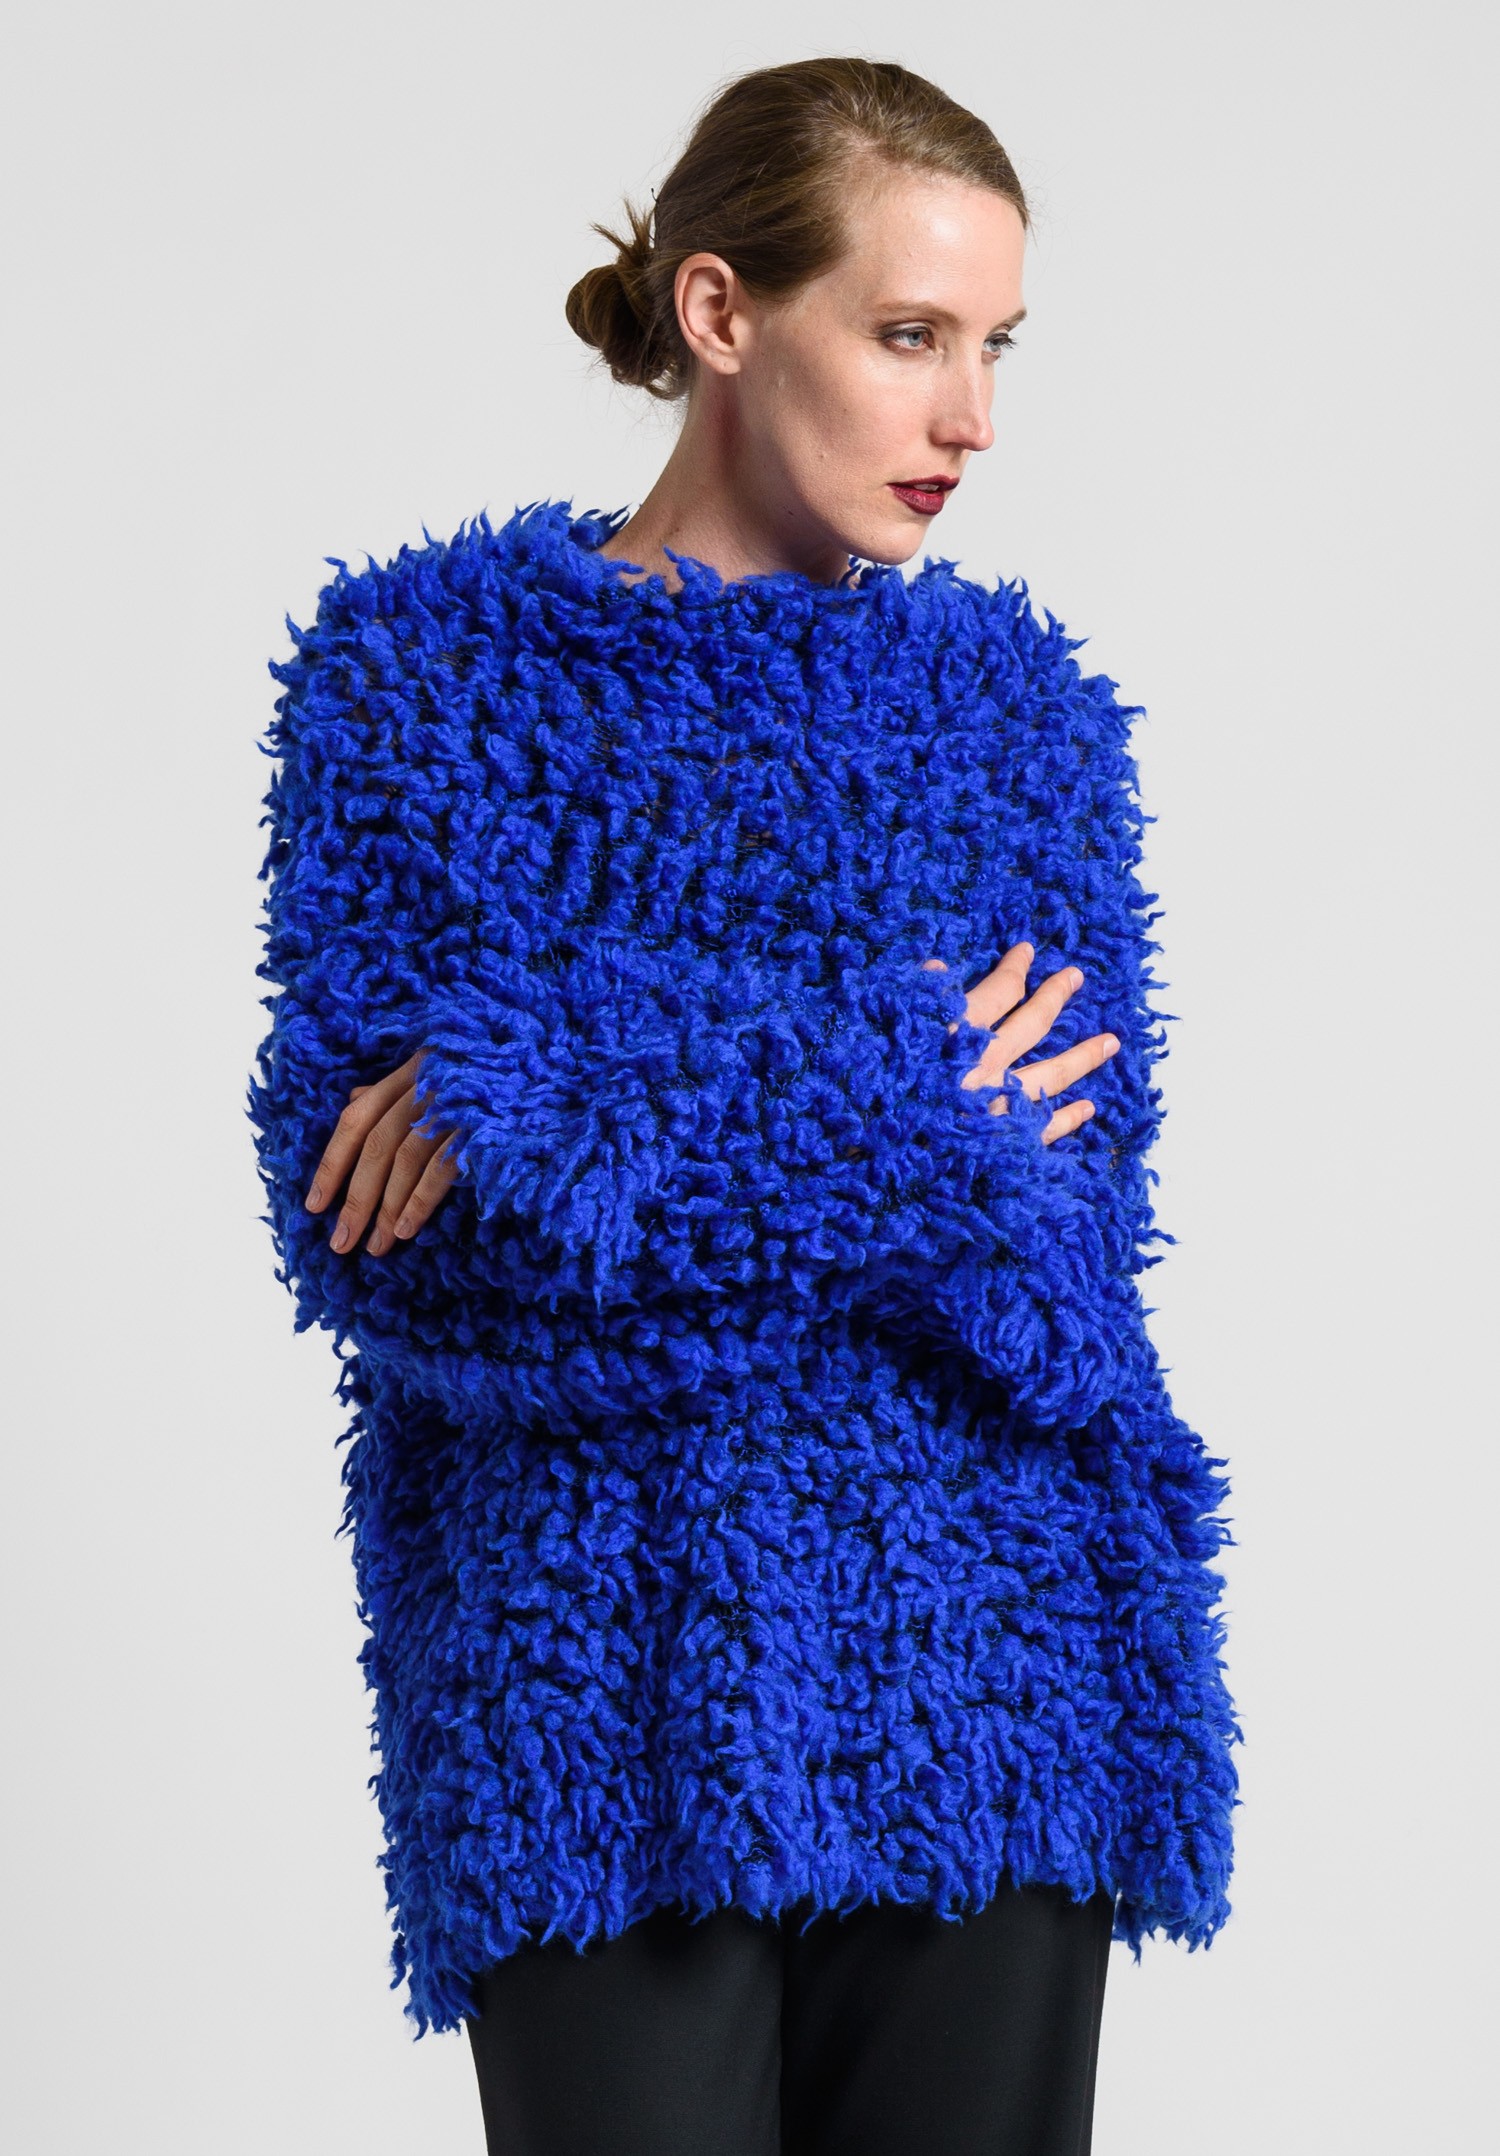 Issey Miyake Oversize Fuzzy Sweater in Electric Blue | Santa Fe ...